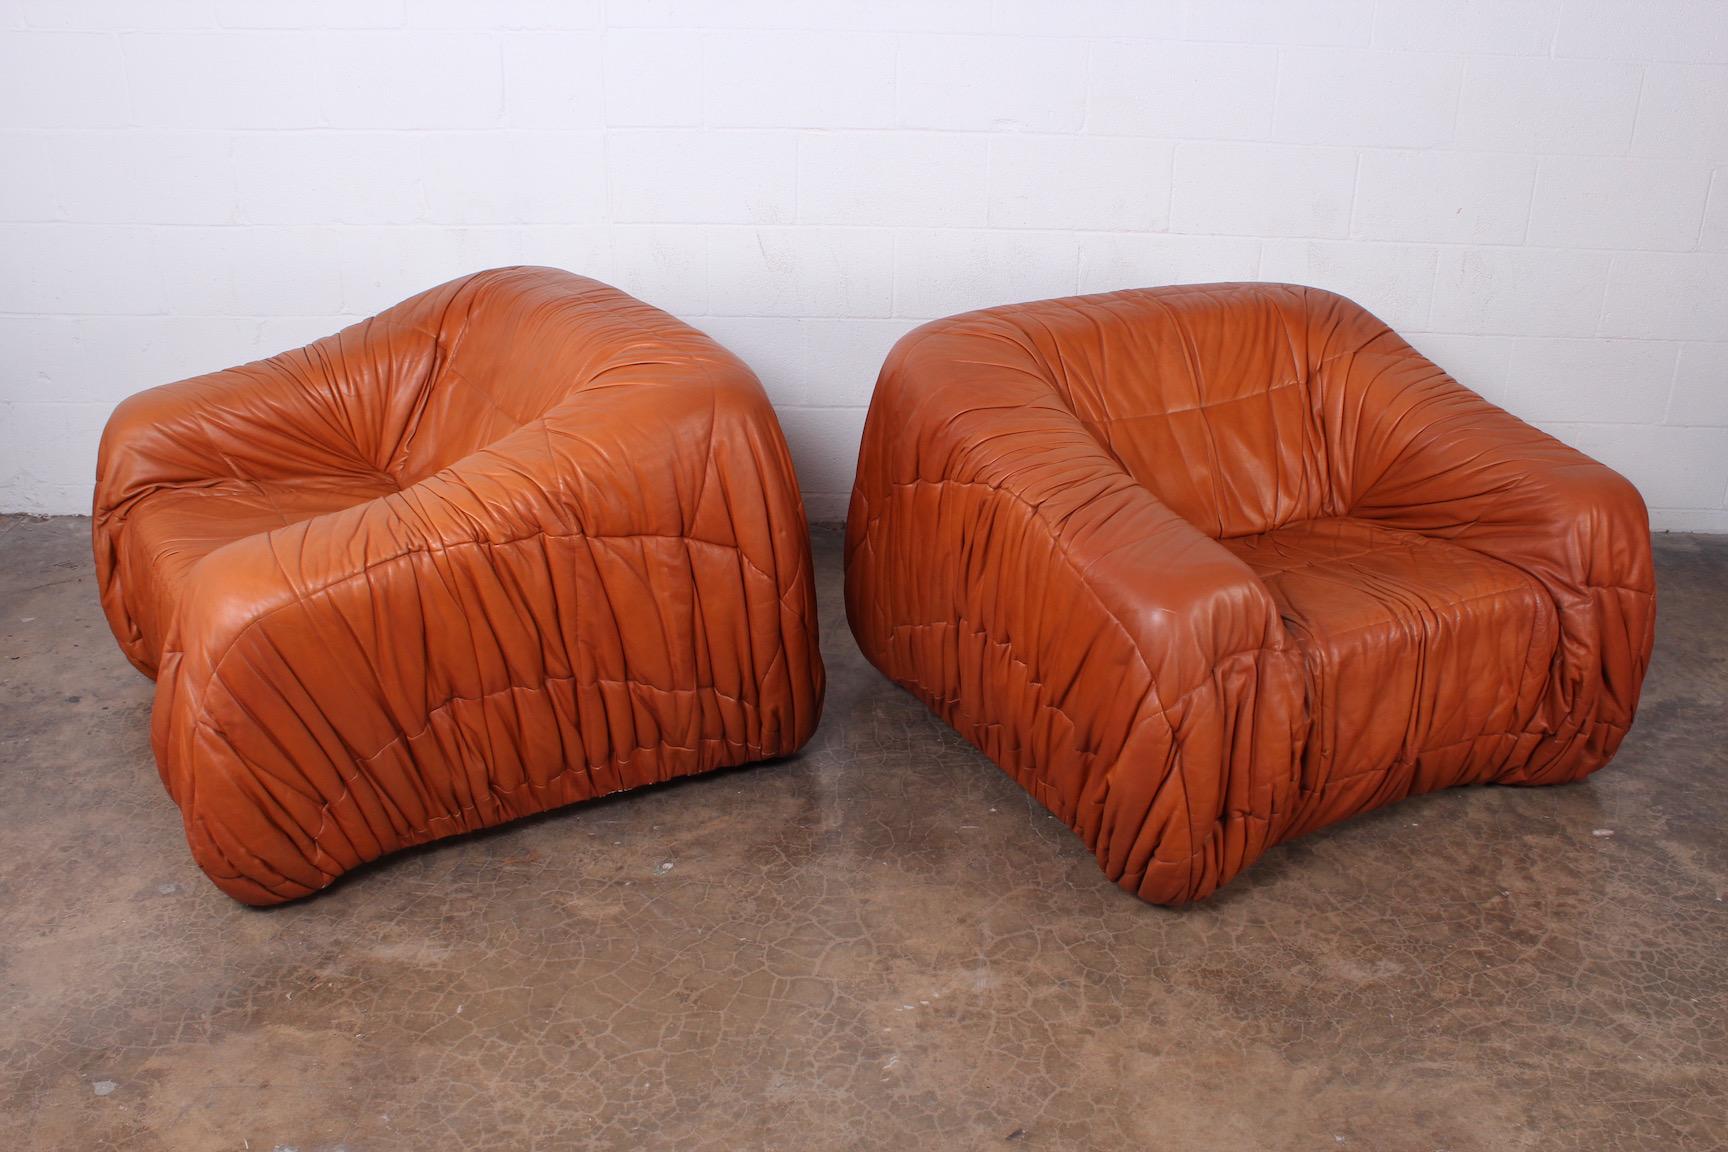 A pair of large scale leather 'Piumino' chairs by De Pas, D'urbino & Lomazzi for Dell'Oca.